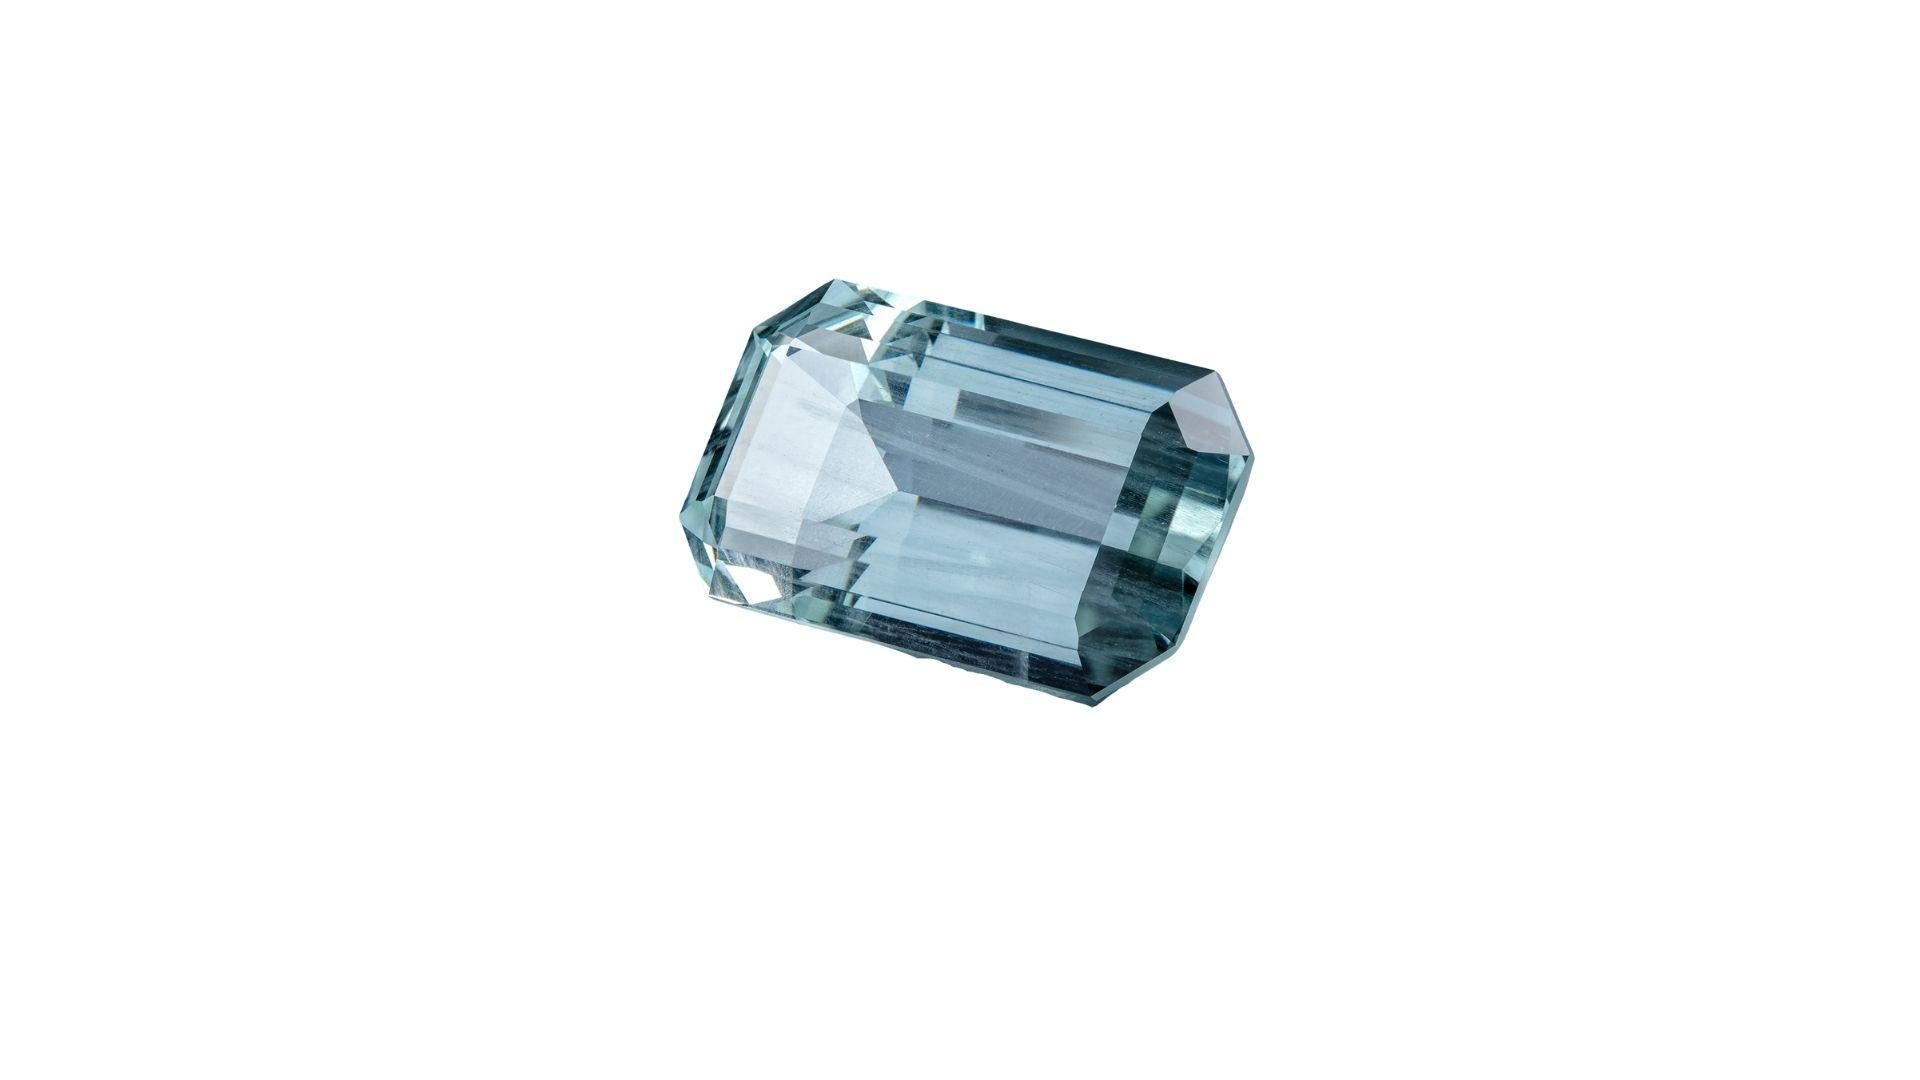 68.29 carats in weight     
19.1 x 33.6 x 14.7 mm in size    
Very Light green blue hue   
Good colour quality     
Eye-clean clarity   
Lightly - moderately included 
50 % brilliance, 30 % window, 20 % extinction  
